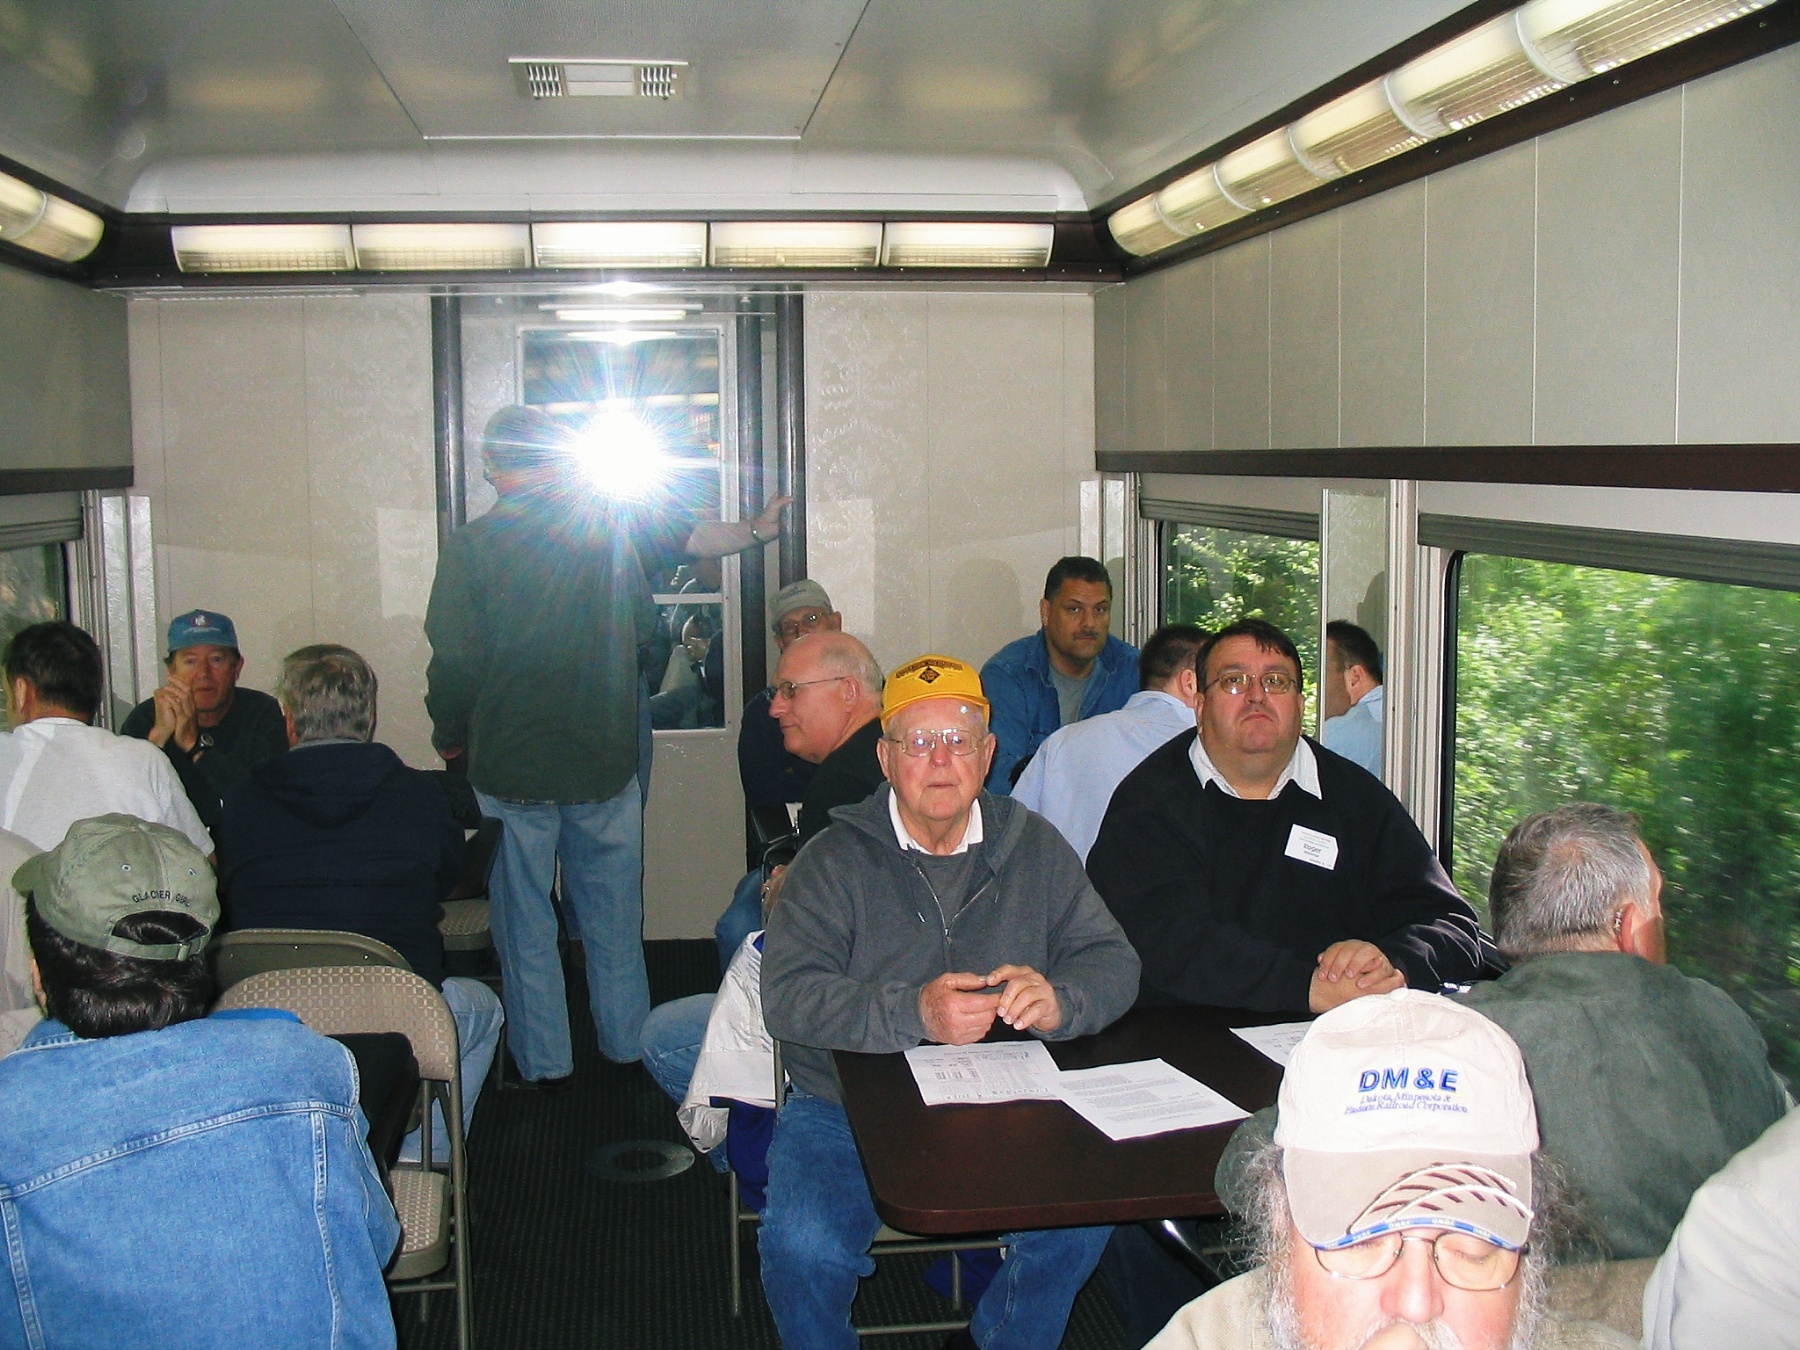 Passengers in the Abe Lincoln. CP Hogger Roger Wiebenga and Kevin Angel are in this photo.